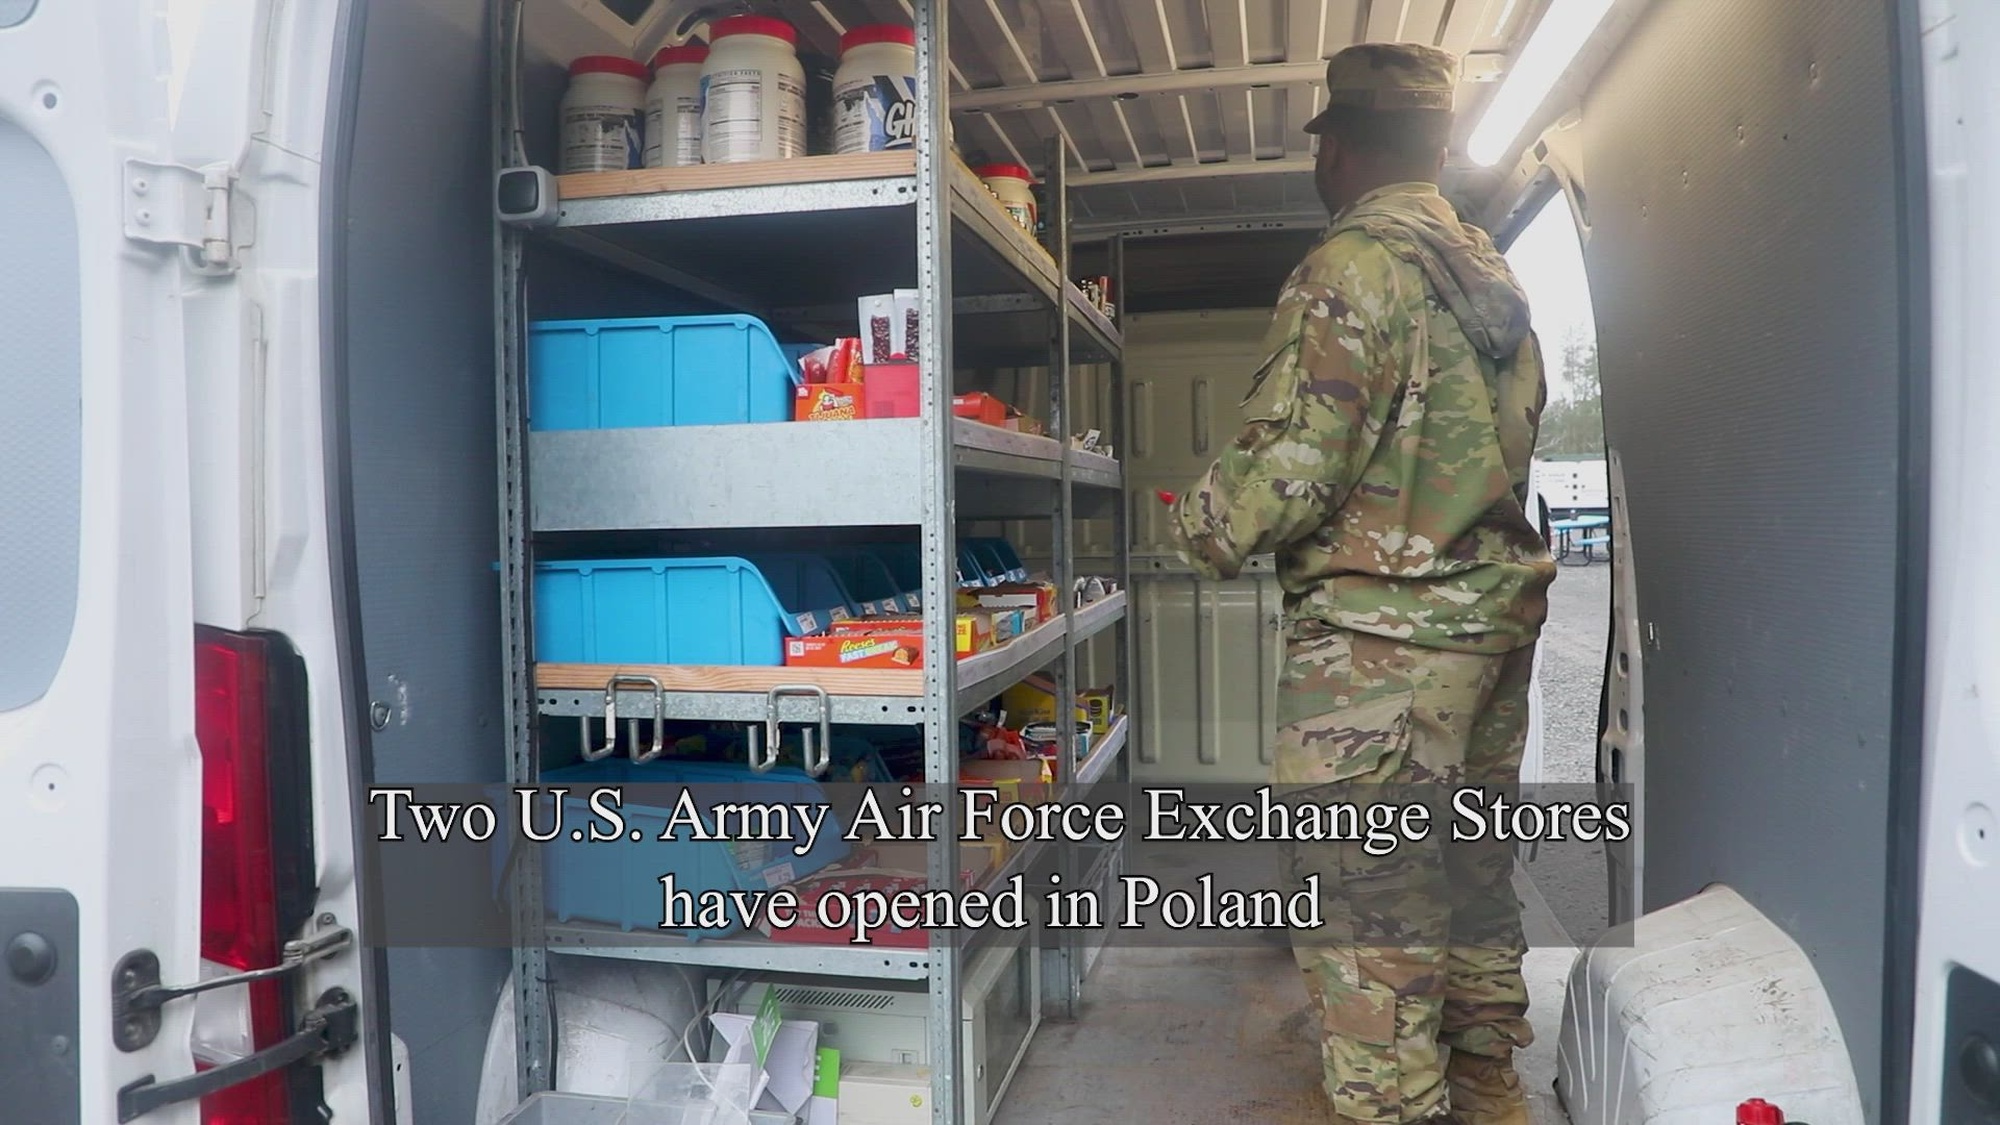 U.S. Army Soldiers assigned to the 87th Division Sustainment Support Battalion, deployed to Karliki and Świętoszów, establish two Army Air Force Exchange Stores at each forward operating site in Poland, March 21, 2024. The 3rd Division Sustainment Brigade's Task Force Provider, as part of a rotation of forces in Europe, is working to set the V Corps area of operations for sustainment and improve quality of life facilities for Soldiers stationed there. The 3rd Infantry Division deployed to Europe to engage in multinational training and operations to build readiness for contingency response and deter adversaries.